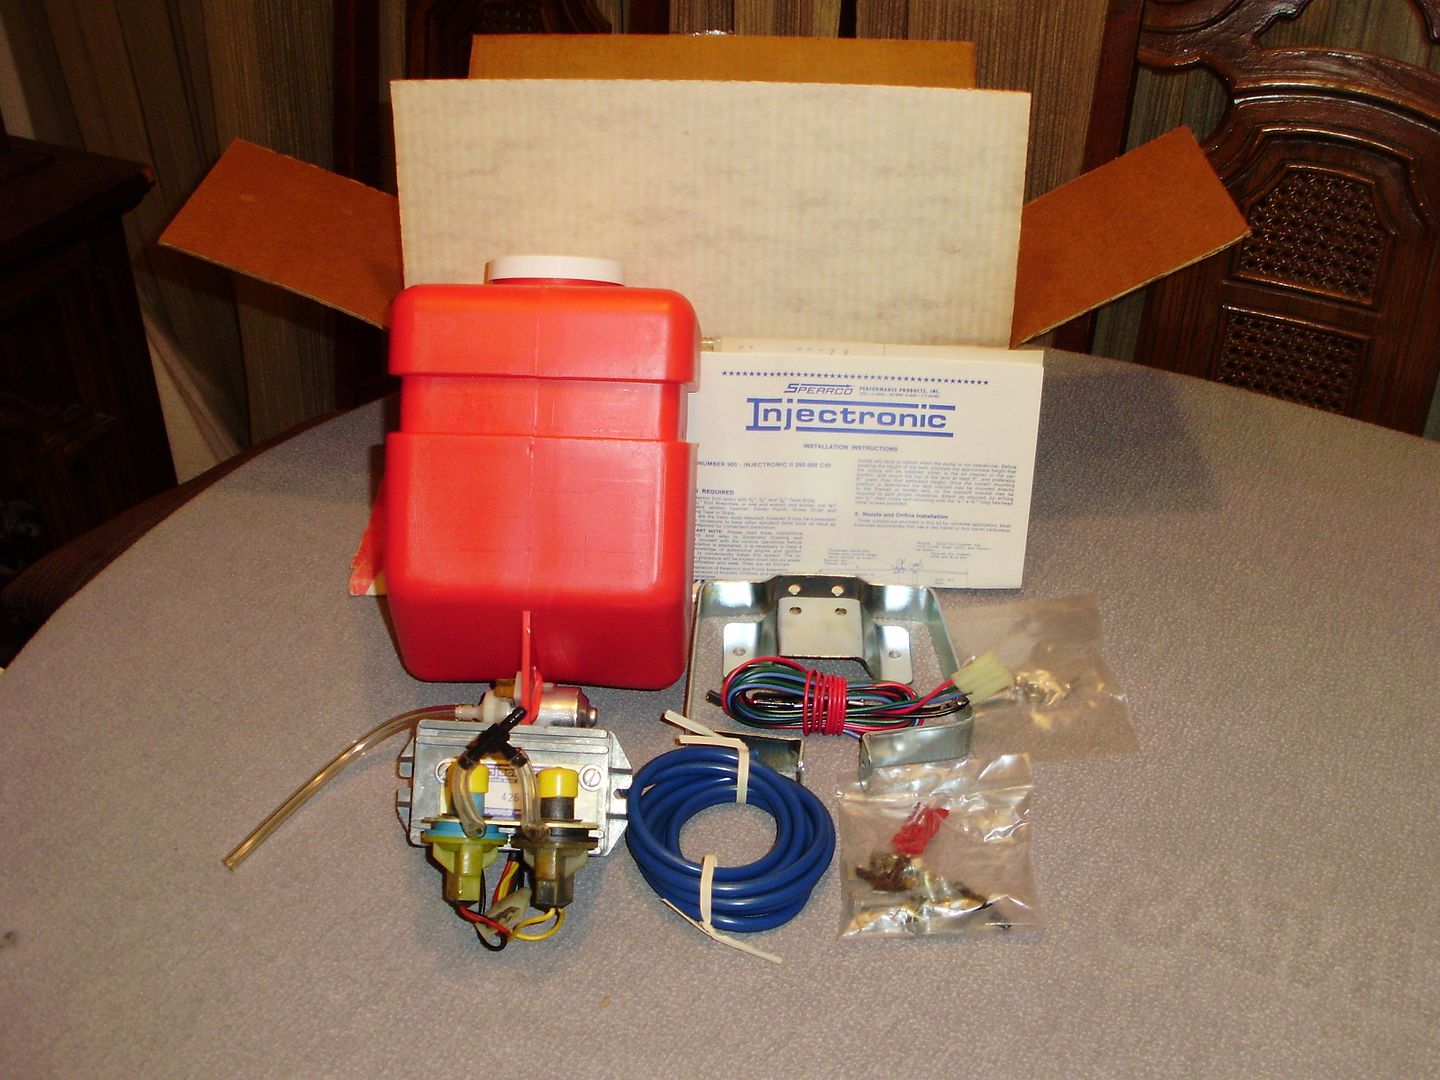  photo NOS SPEARCO INJECTRONIC WATER INJECTION SYSTEM PART 900 015_zpsrwiwtjcx.jpg